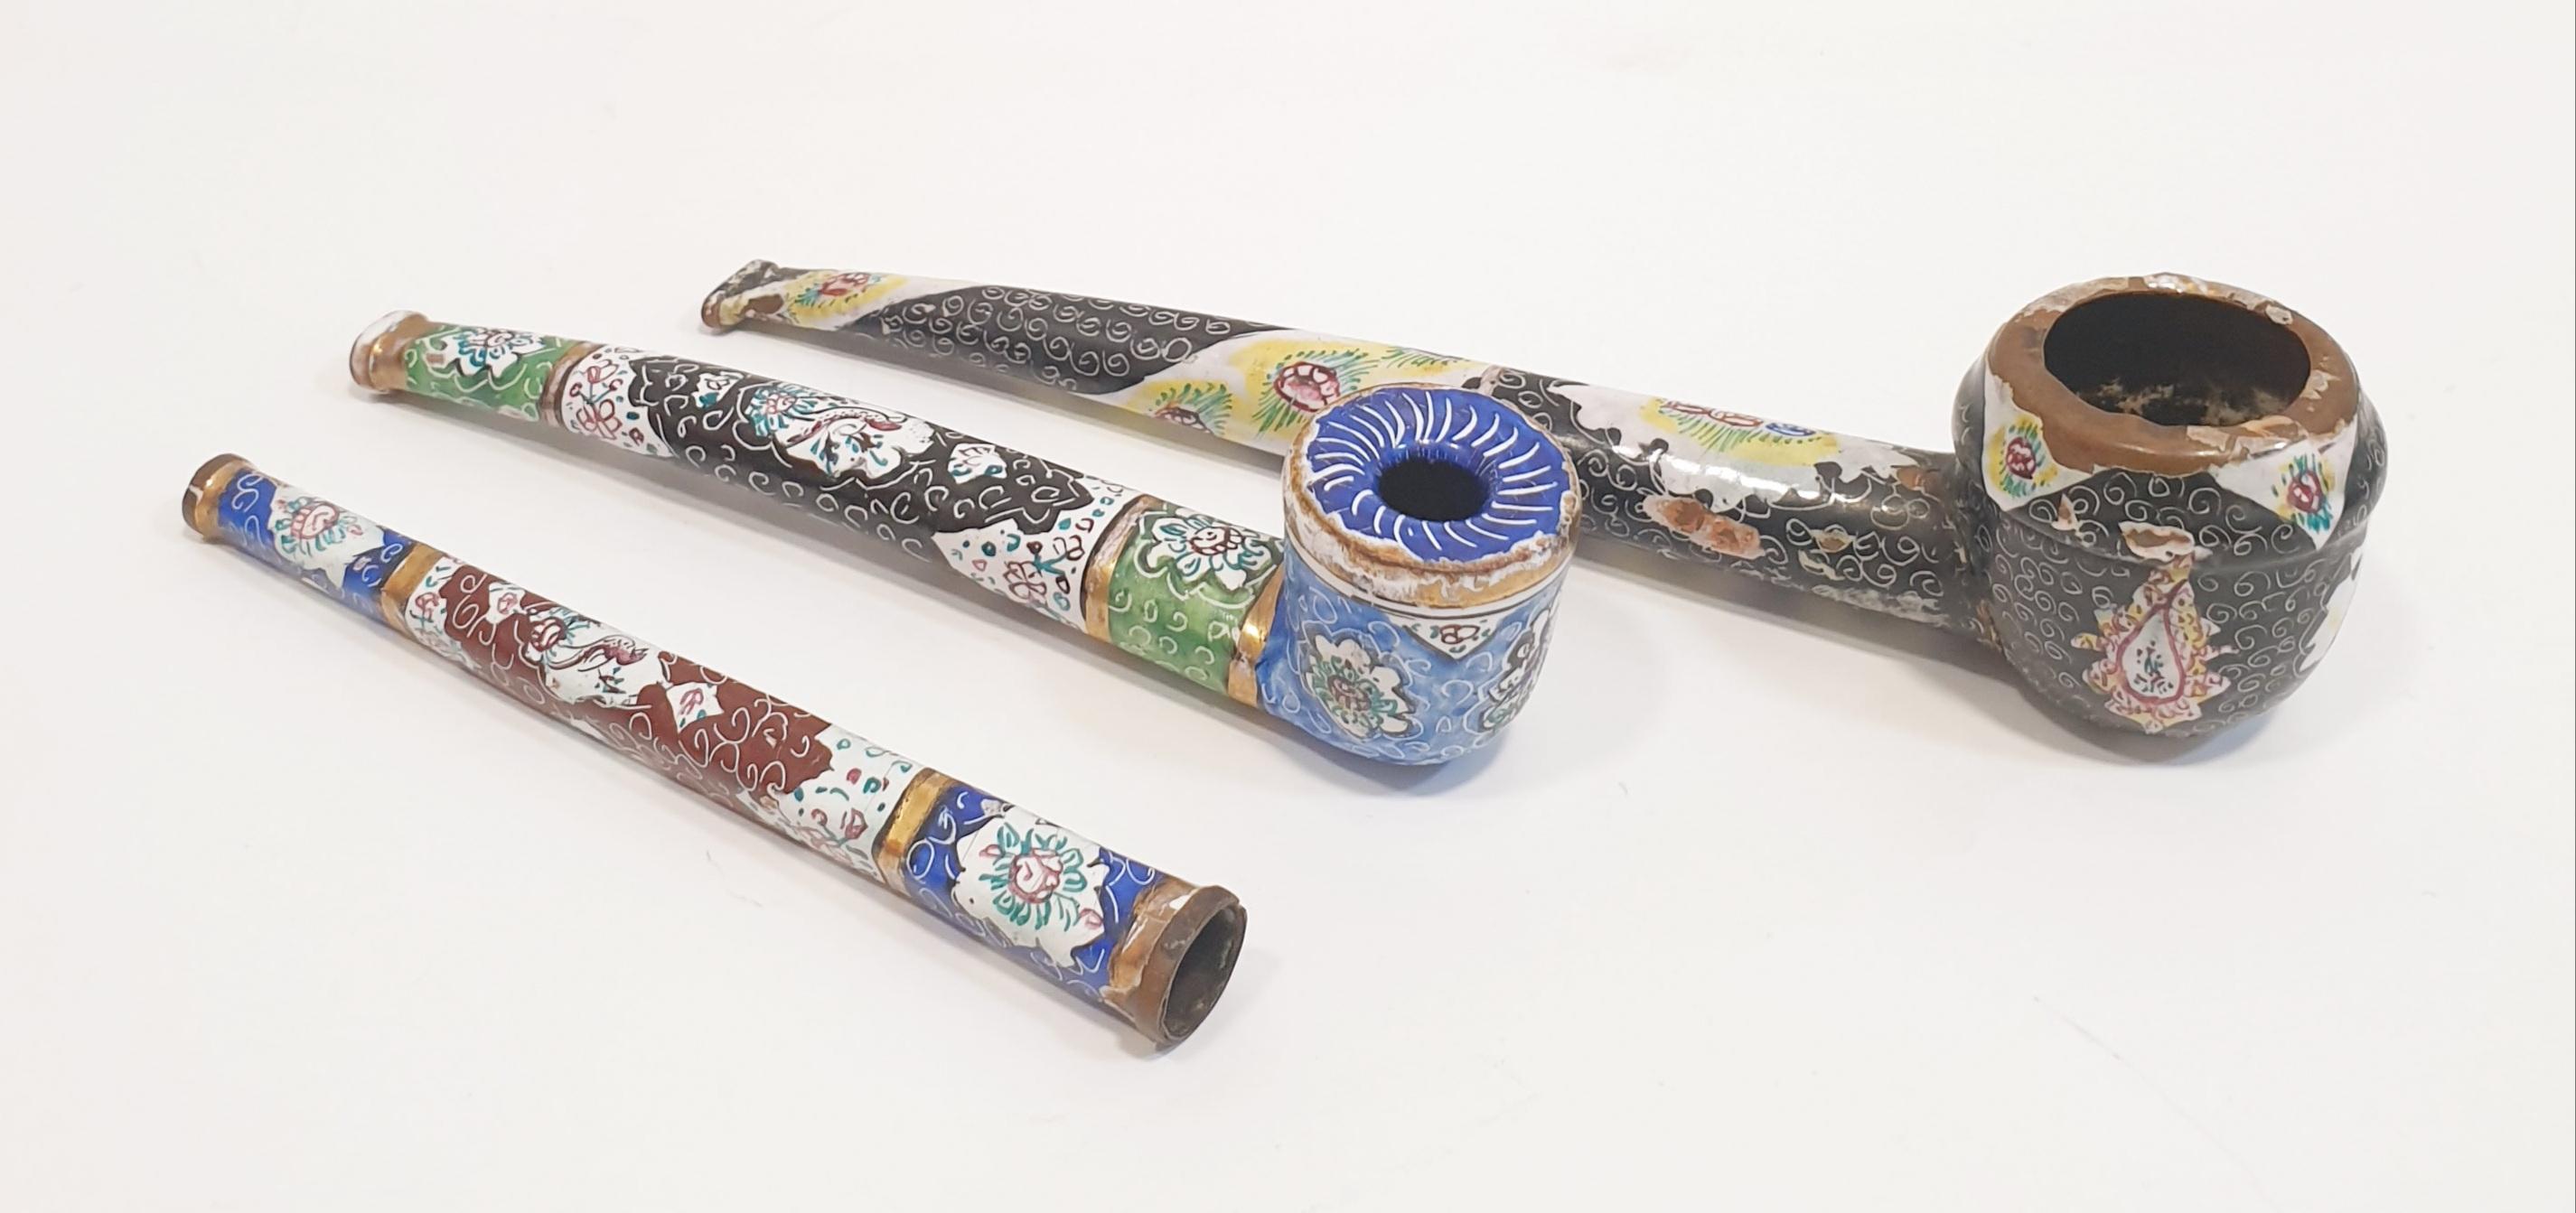 Antique 19th Hand Painted Porcelain pipes with promenade scene

PRADERA is a second generation of a family run business jewelers of reference in Spain, with a rich track record being official distributers of prime European jewelry brands like